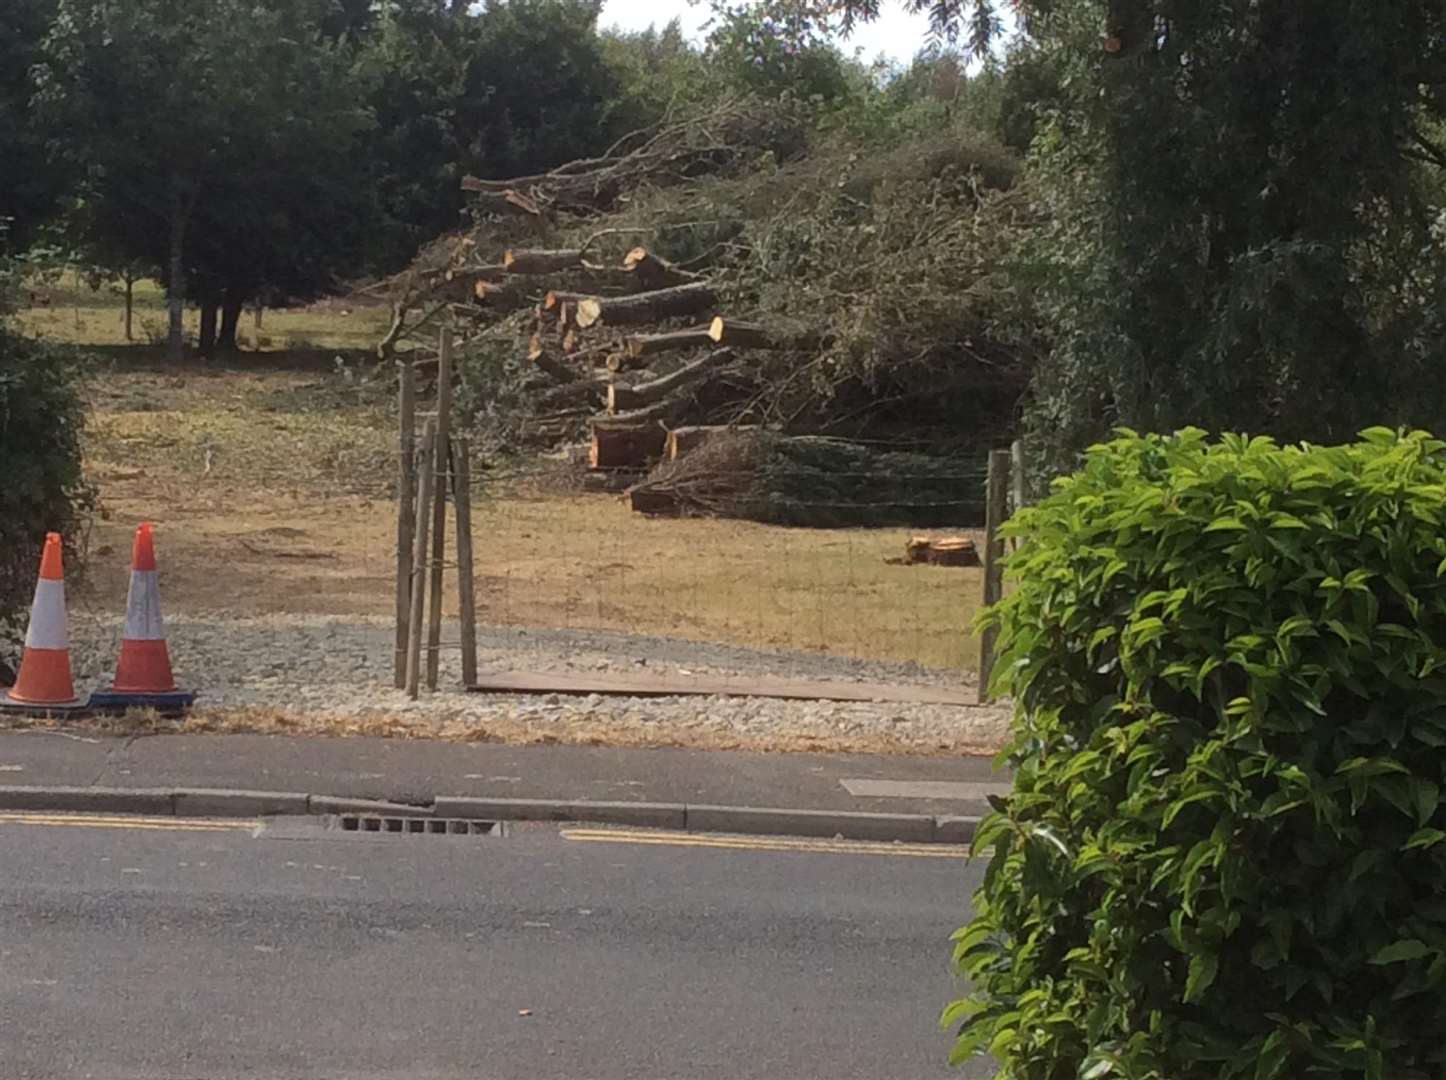 The felled trees stacked up